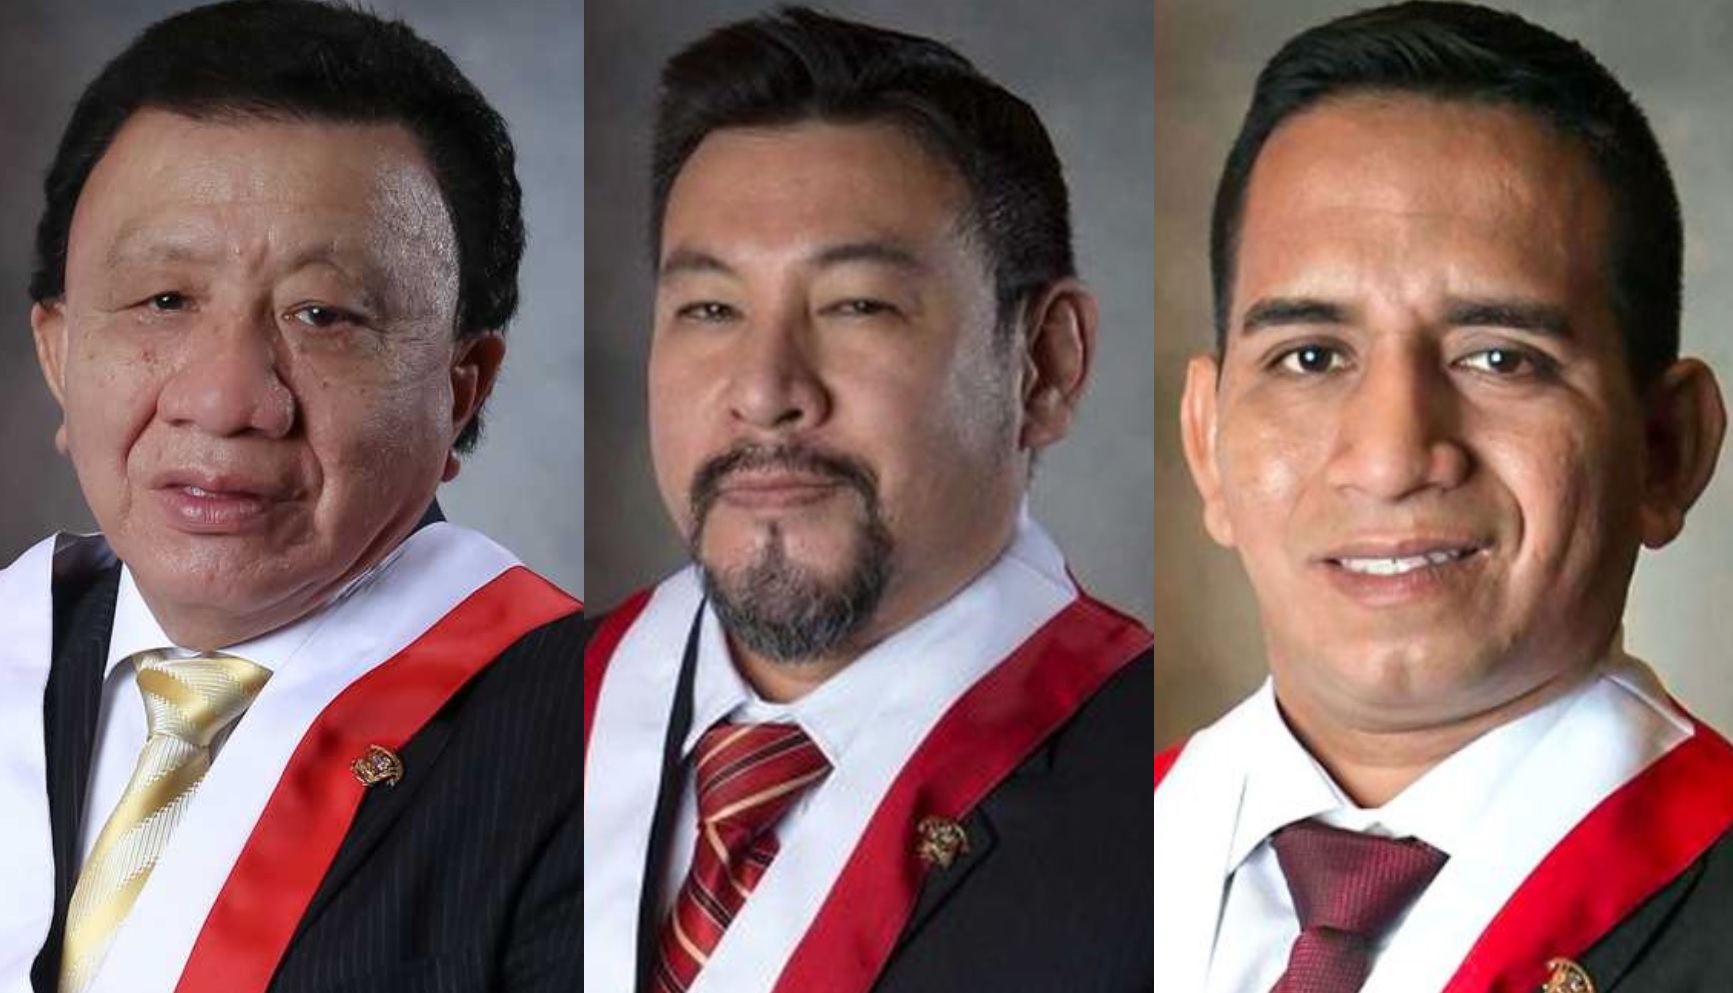 Parliamentarians Enrique Wong, Luis Cordero, Elvis Vergara and Jorge Flores are one step away from being sanctioned.